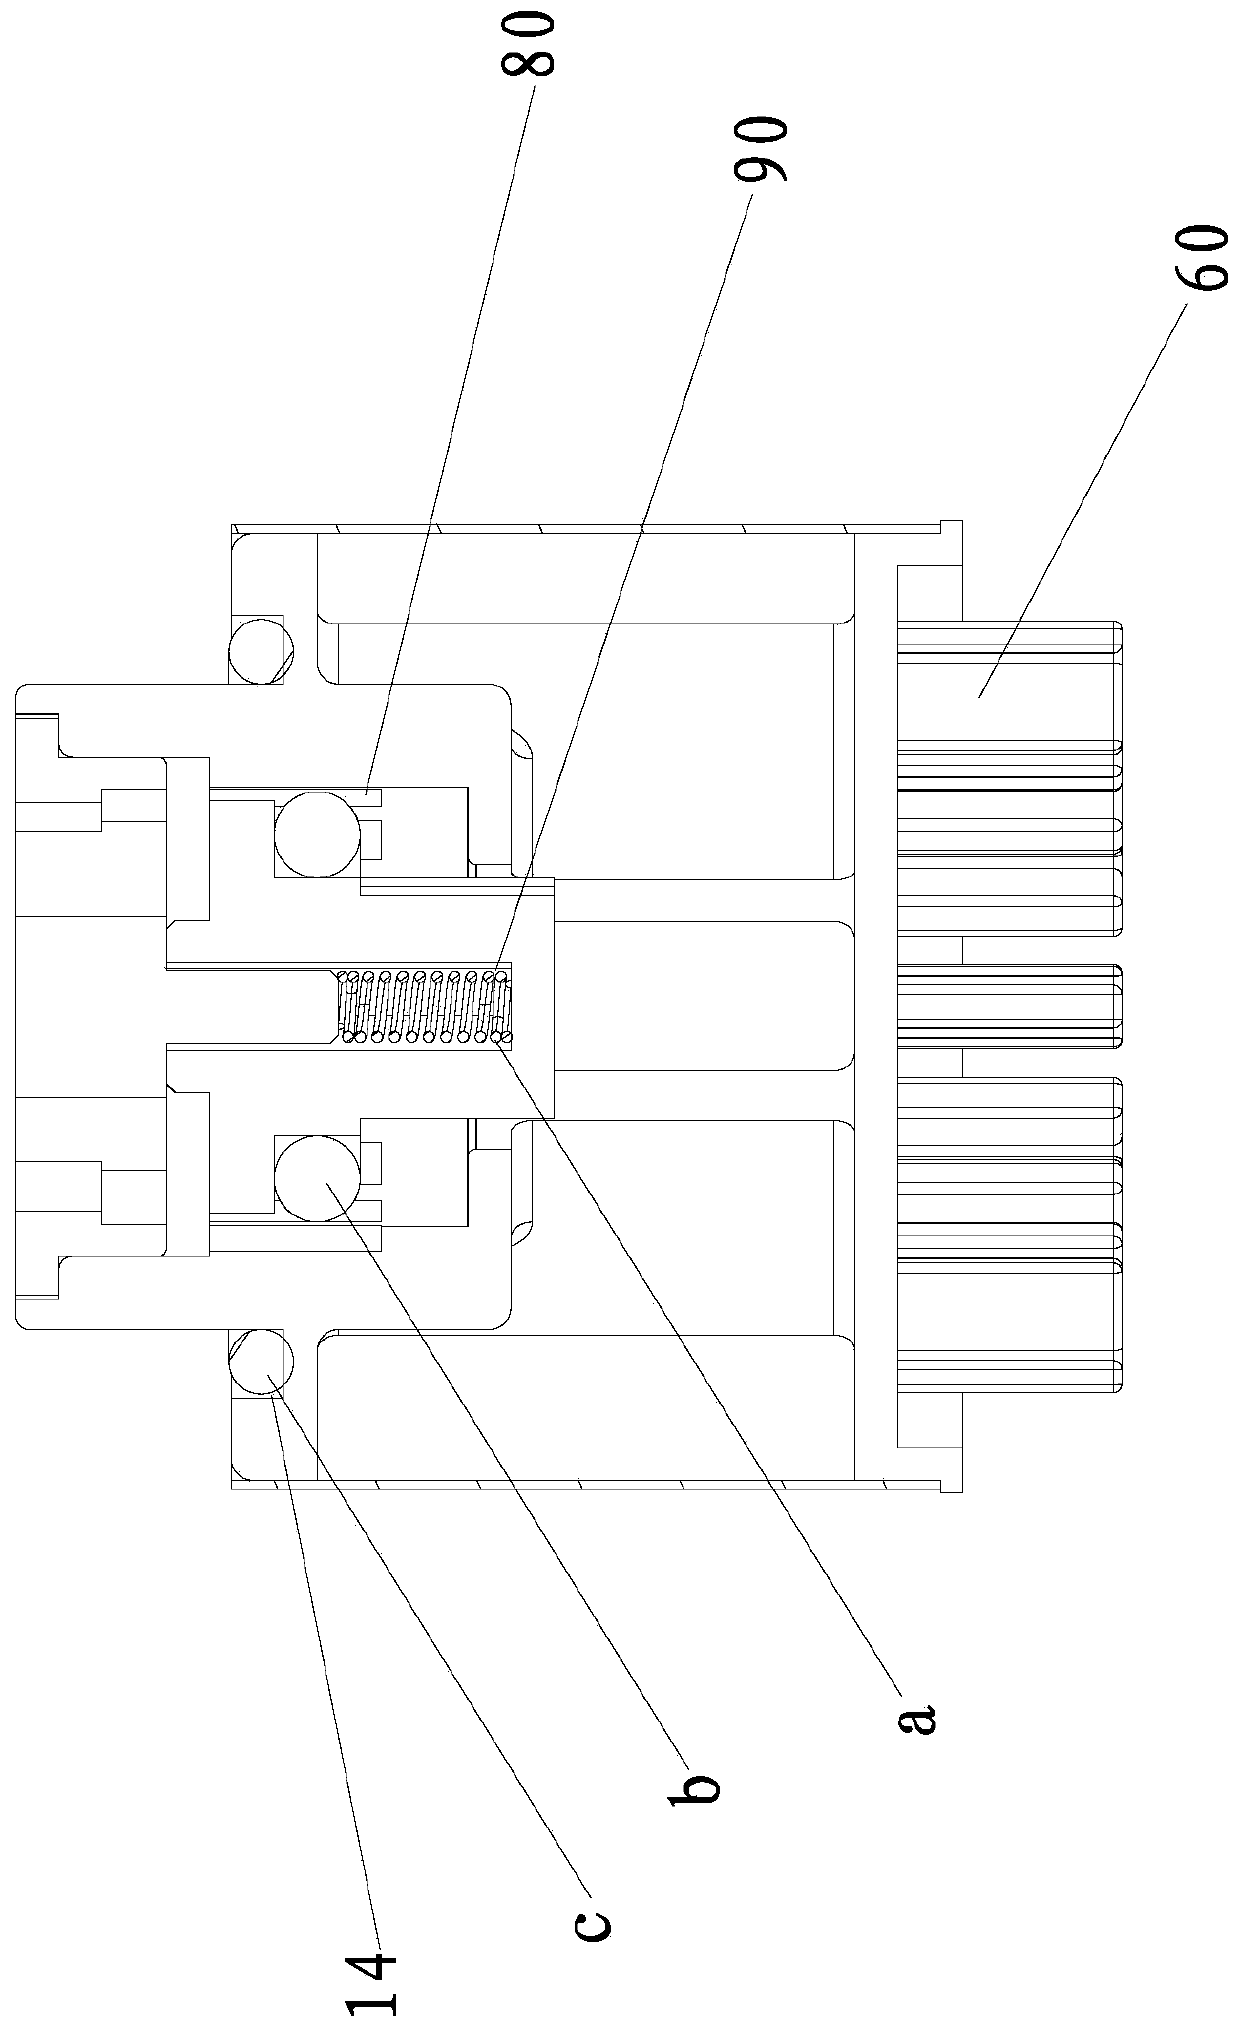 Corner valve joint with constant flow and non-return functions